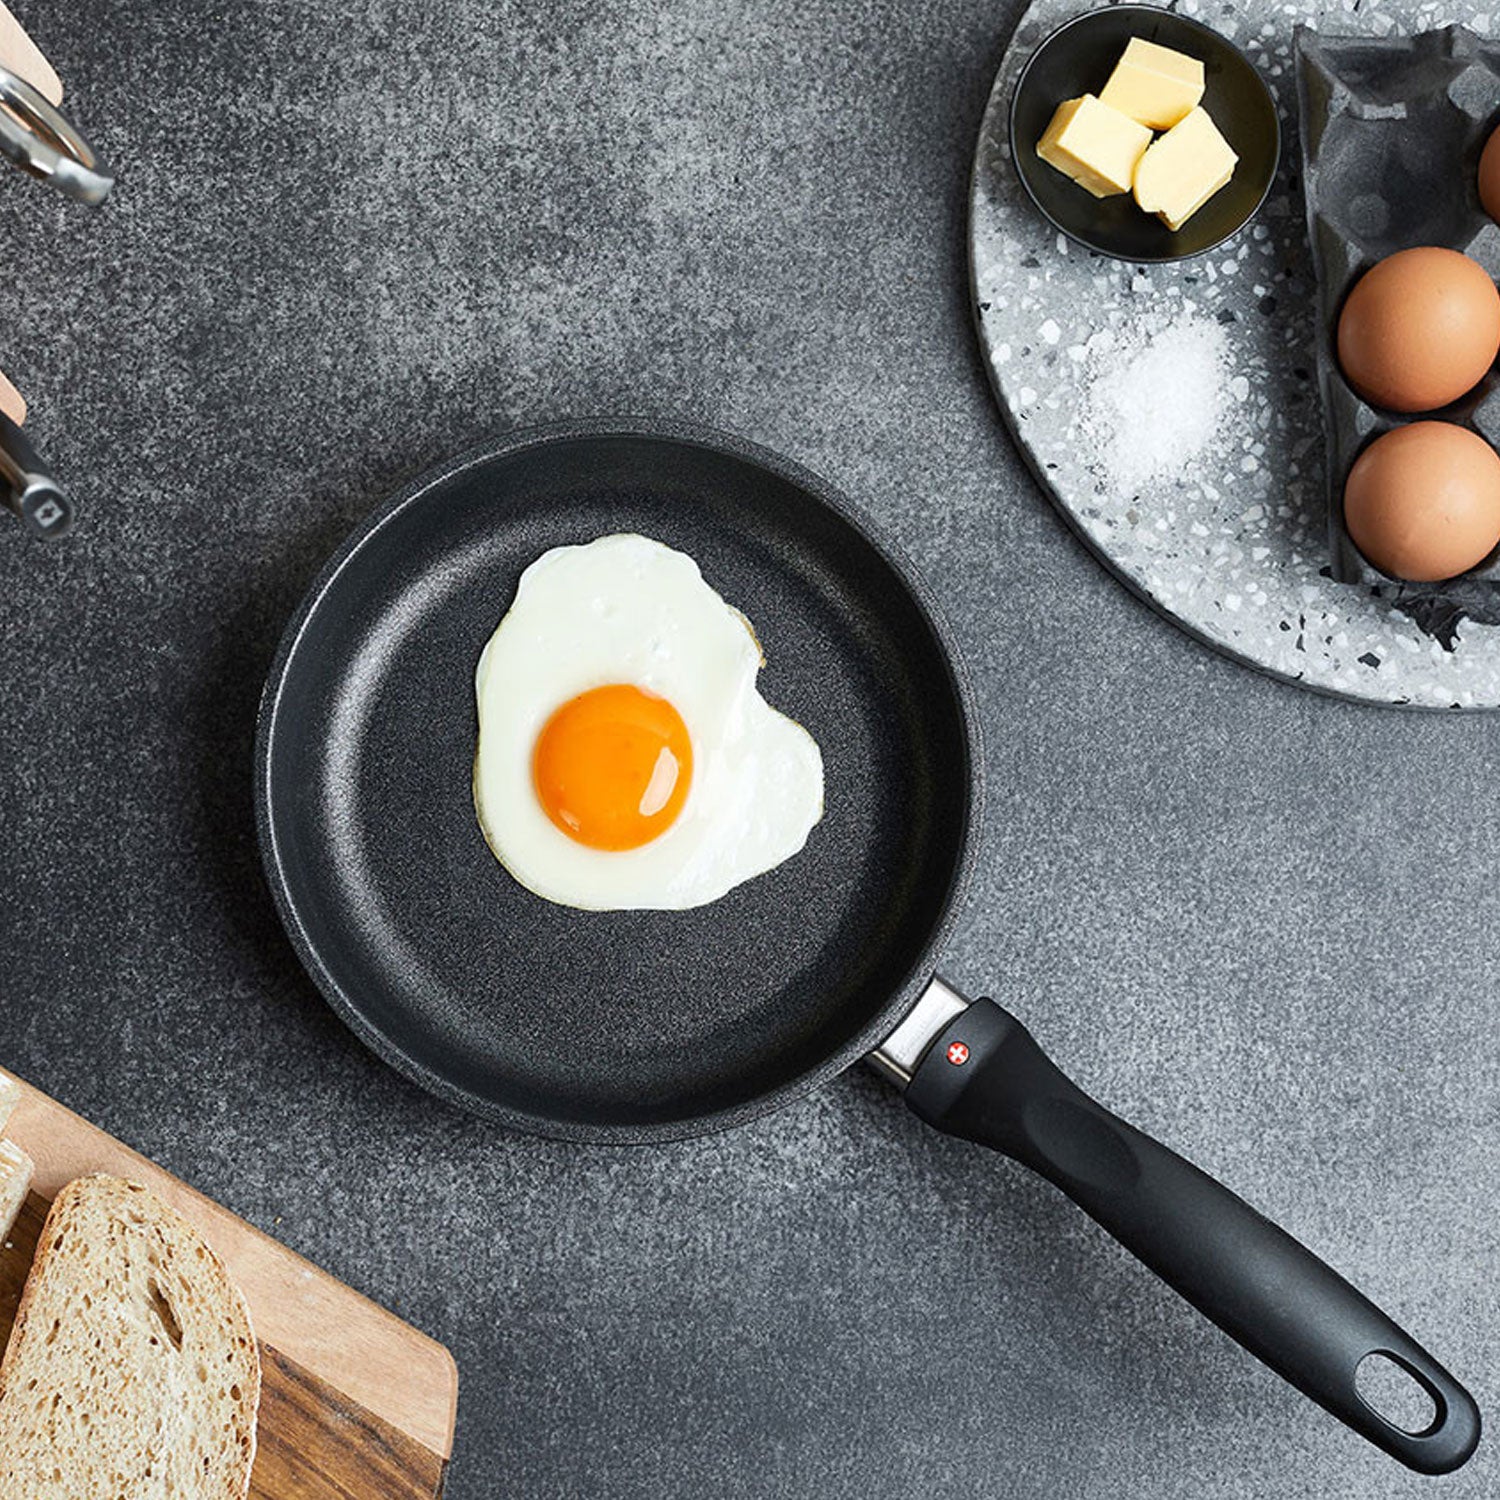 xd fry pan in use with a sunny side egg on a counter